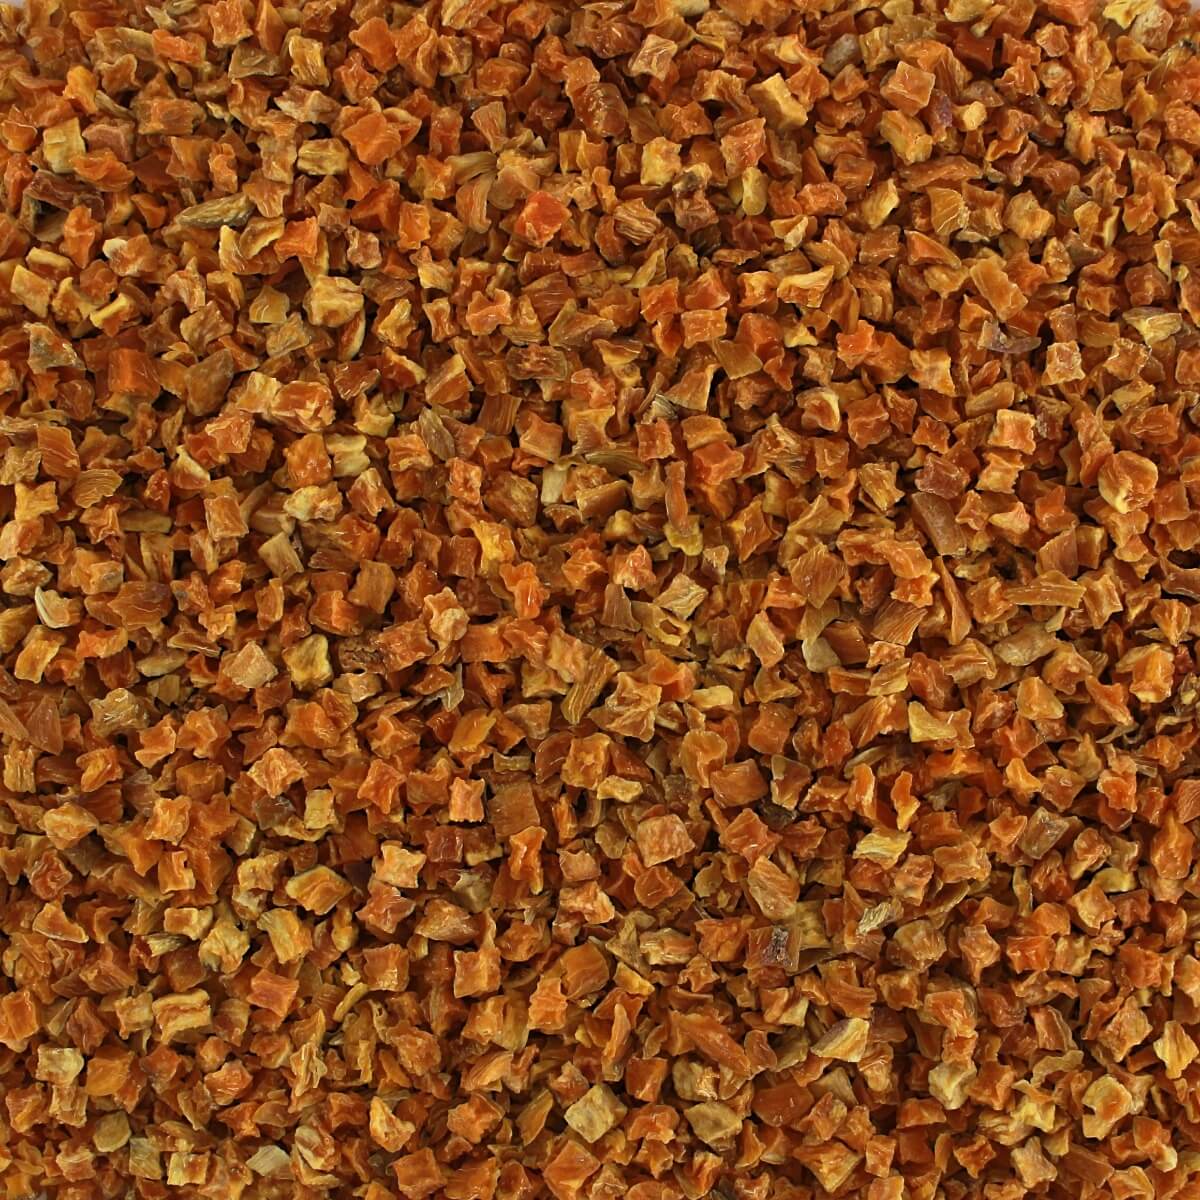 A close up image of a pile of dried oranges.